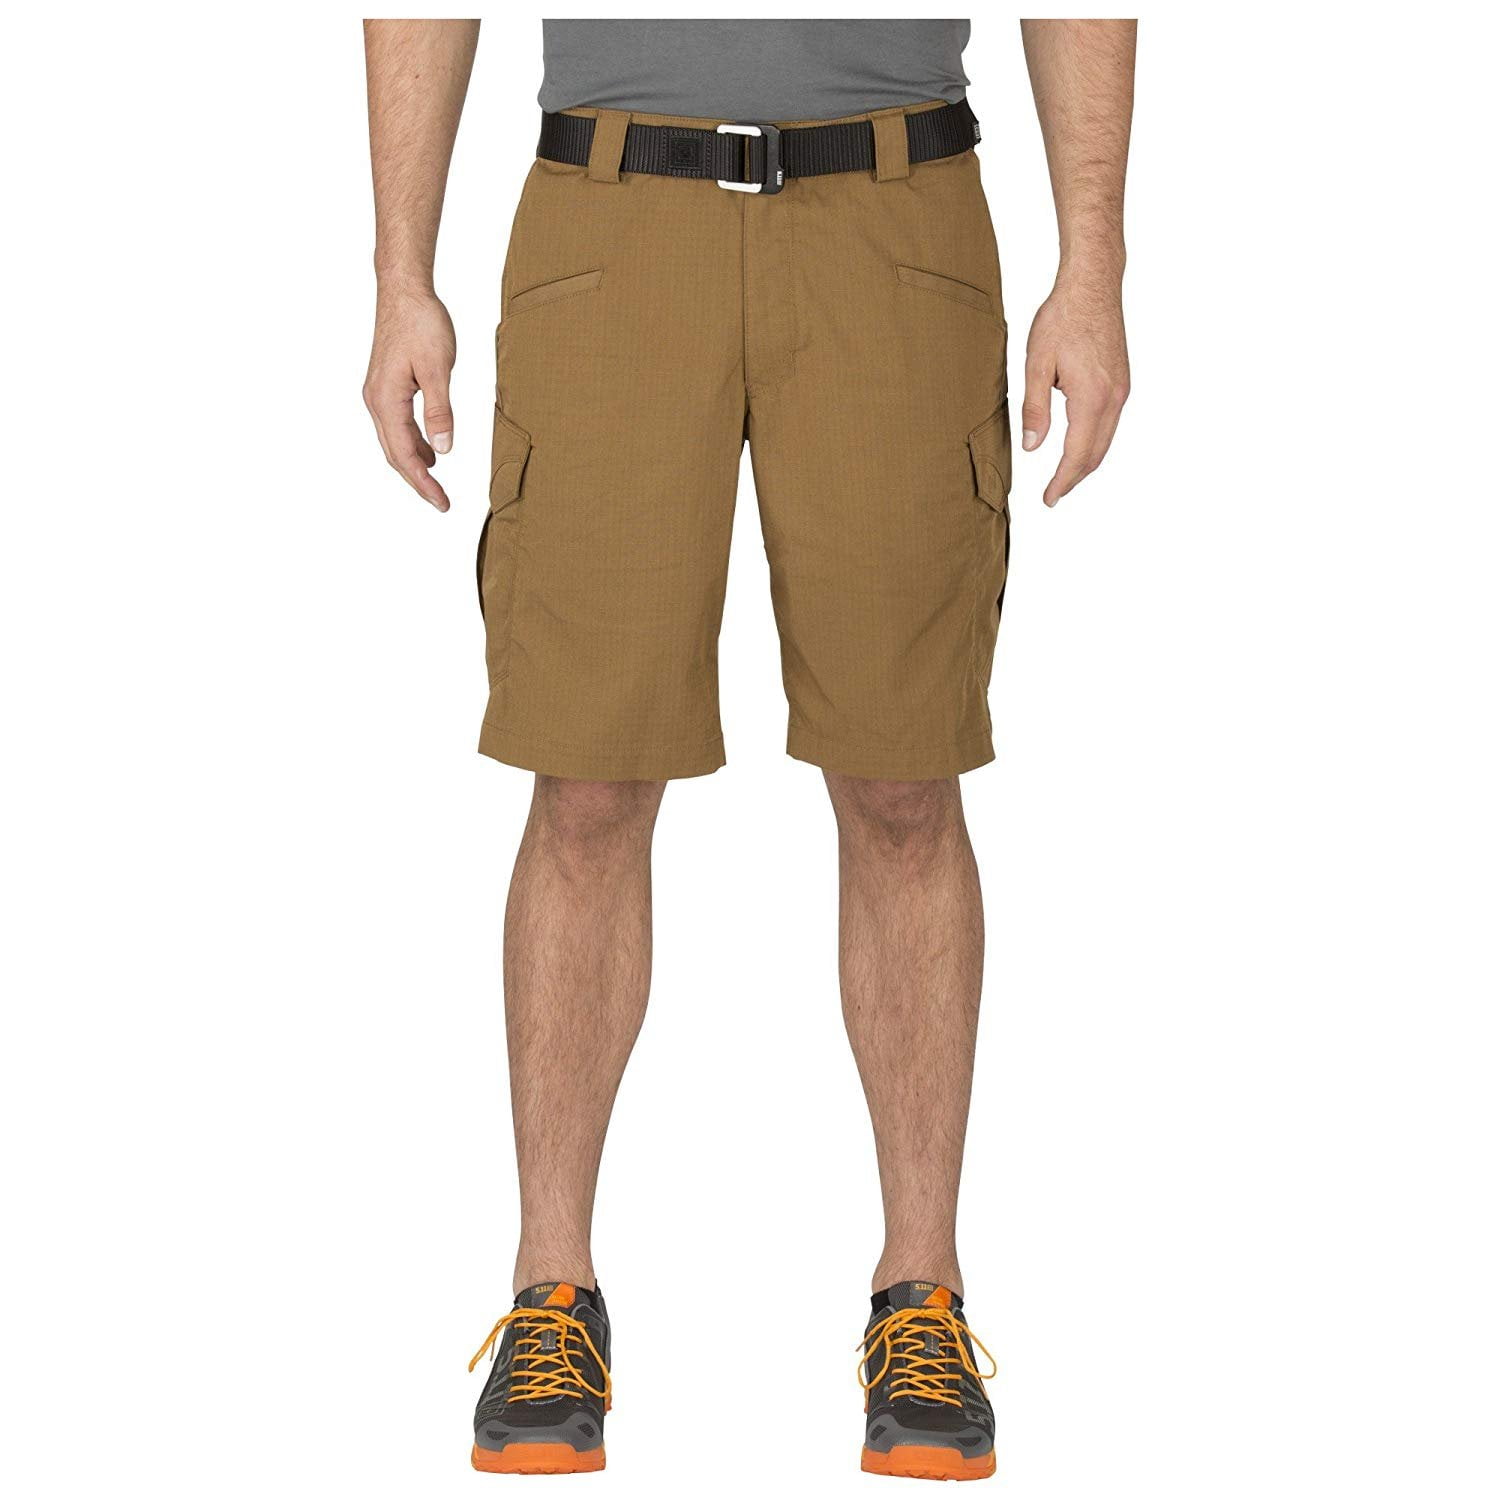 Mens Casual Cargo Trade Work Wear Outdoor Shorts with Multiple Pockets Combat AA 